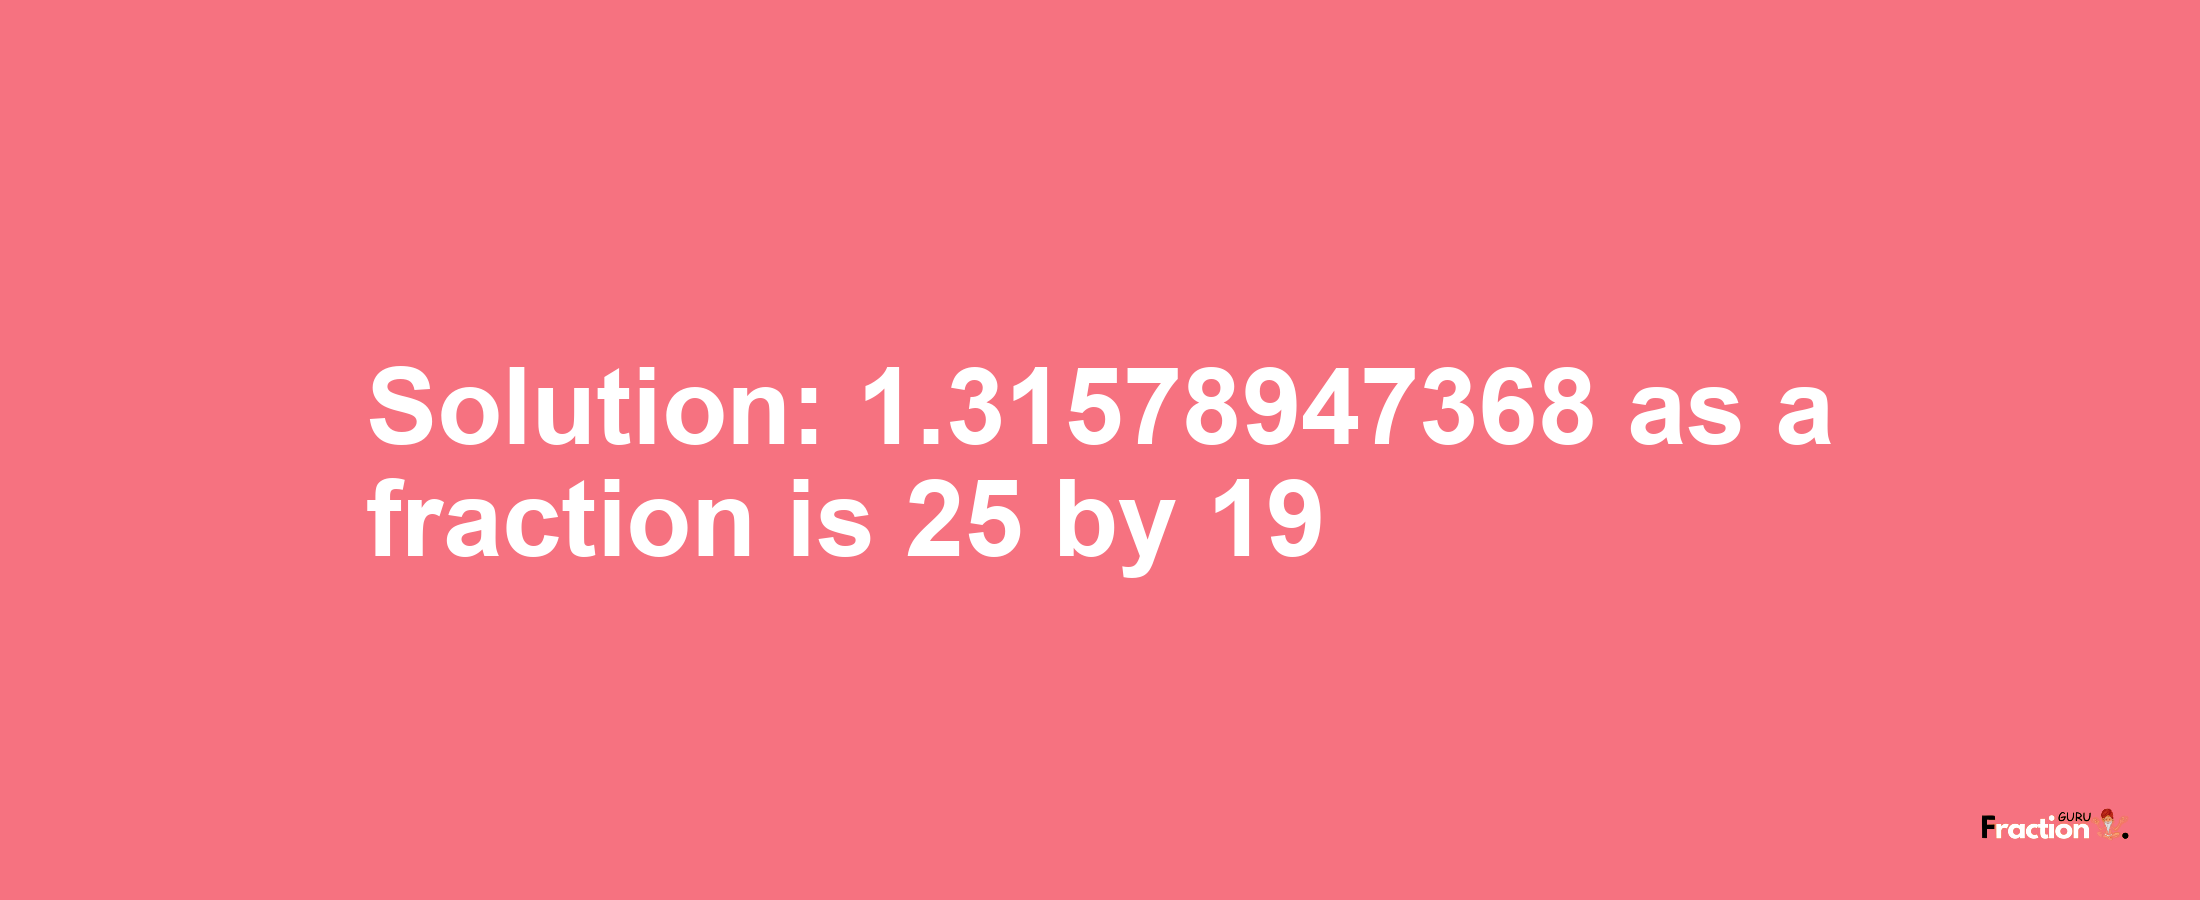 Solution:1.31578947368 as a fraction is 25/19